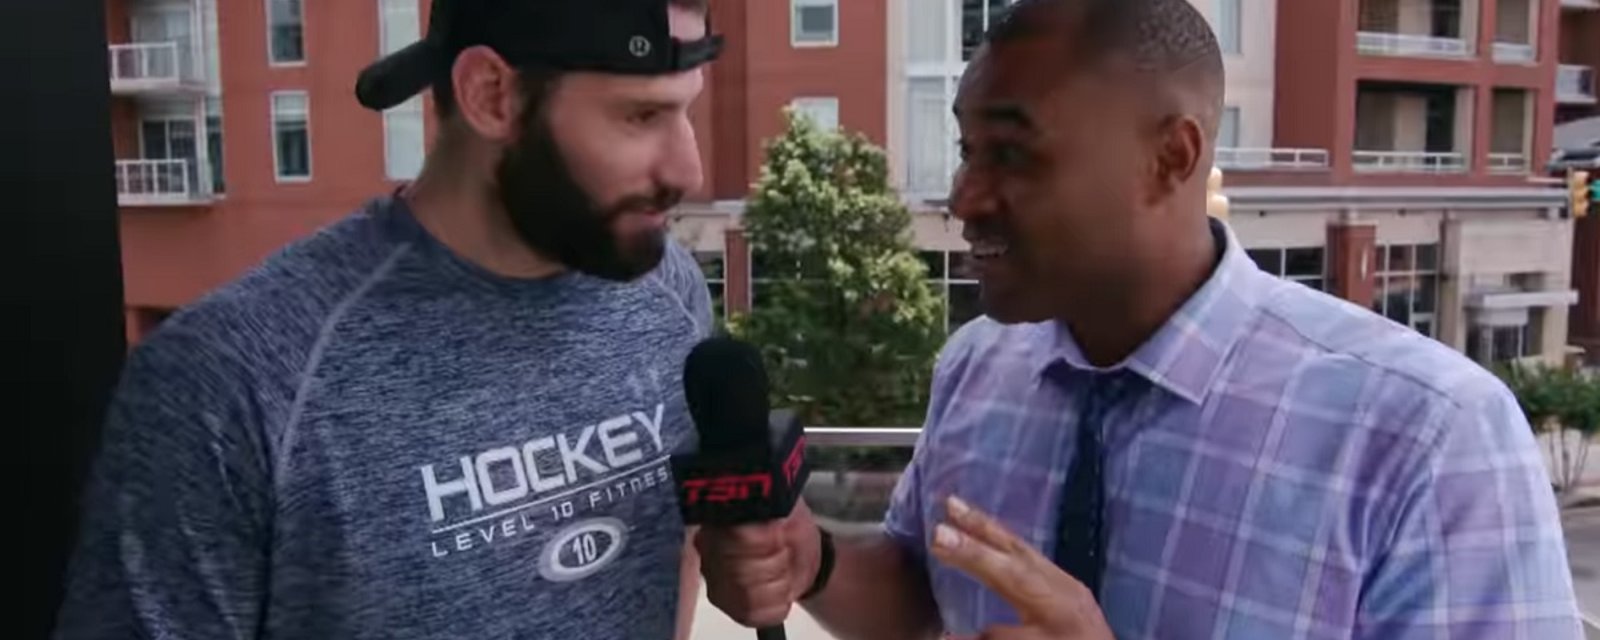 Ryan Kesler opens up about his “veteran moves” in the playoffs in hilarious interview.